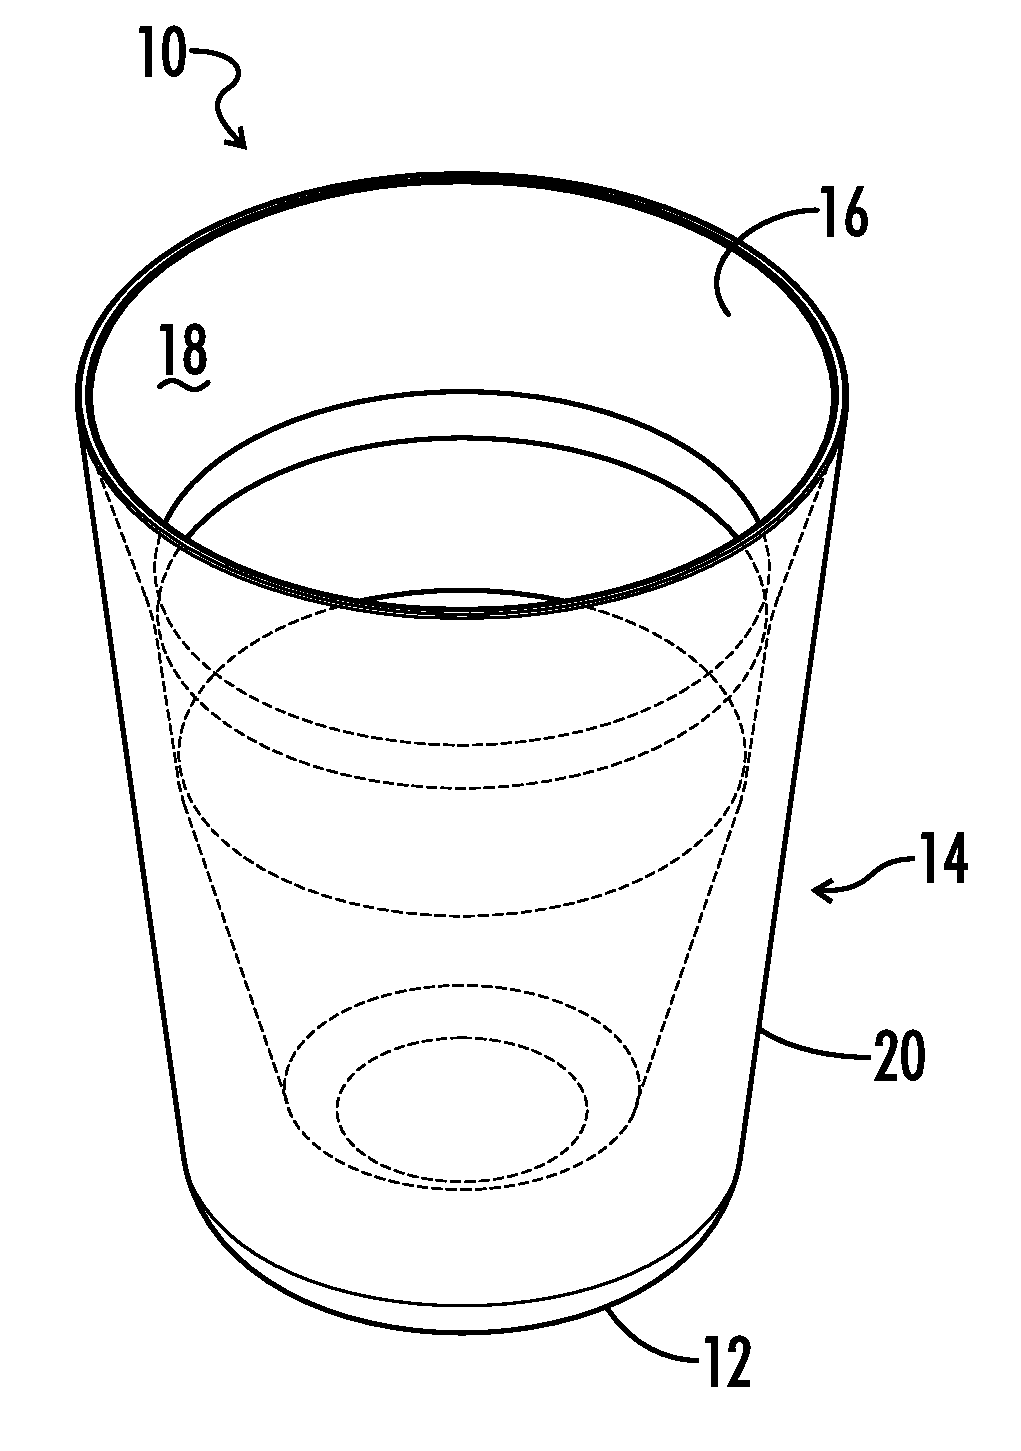 Polymeric replacement for a glass drinking container